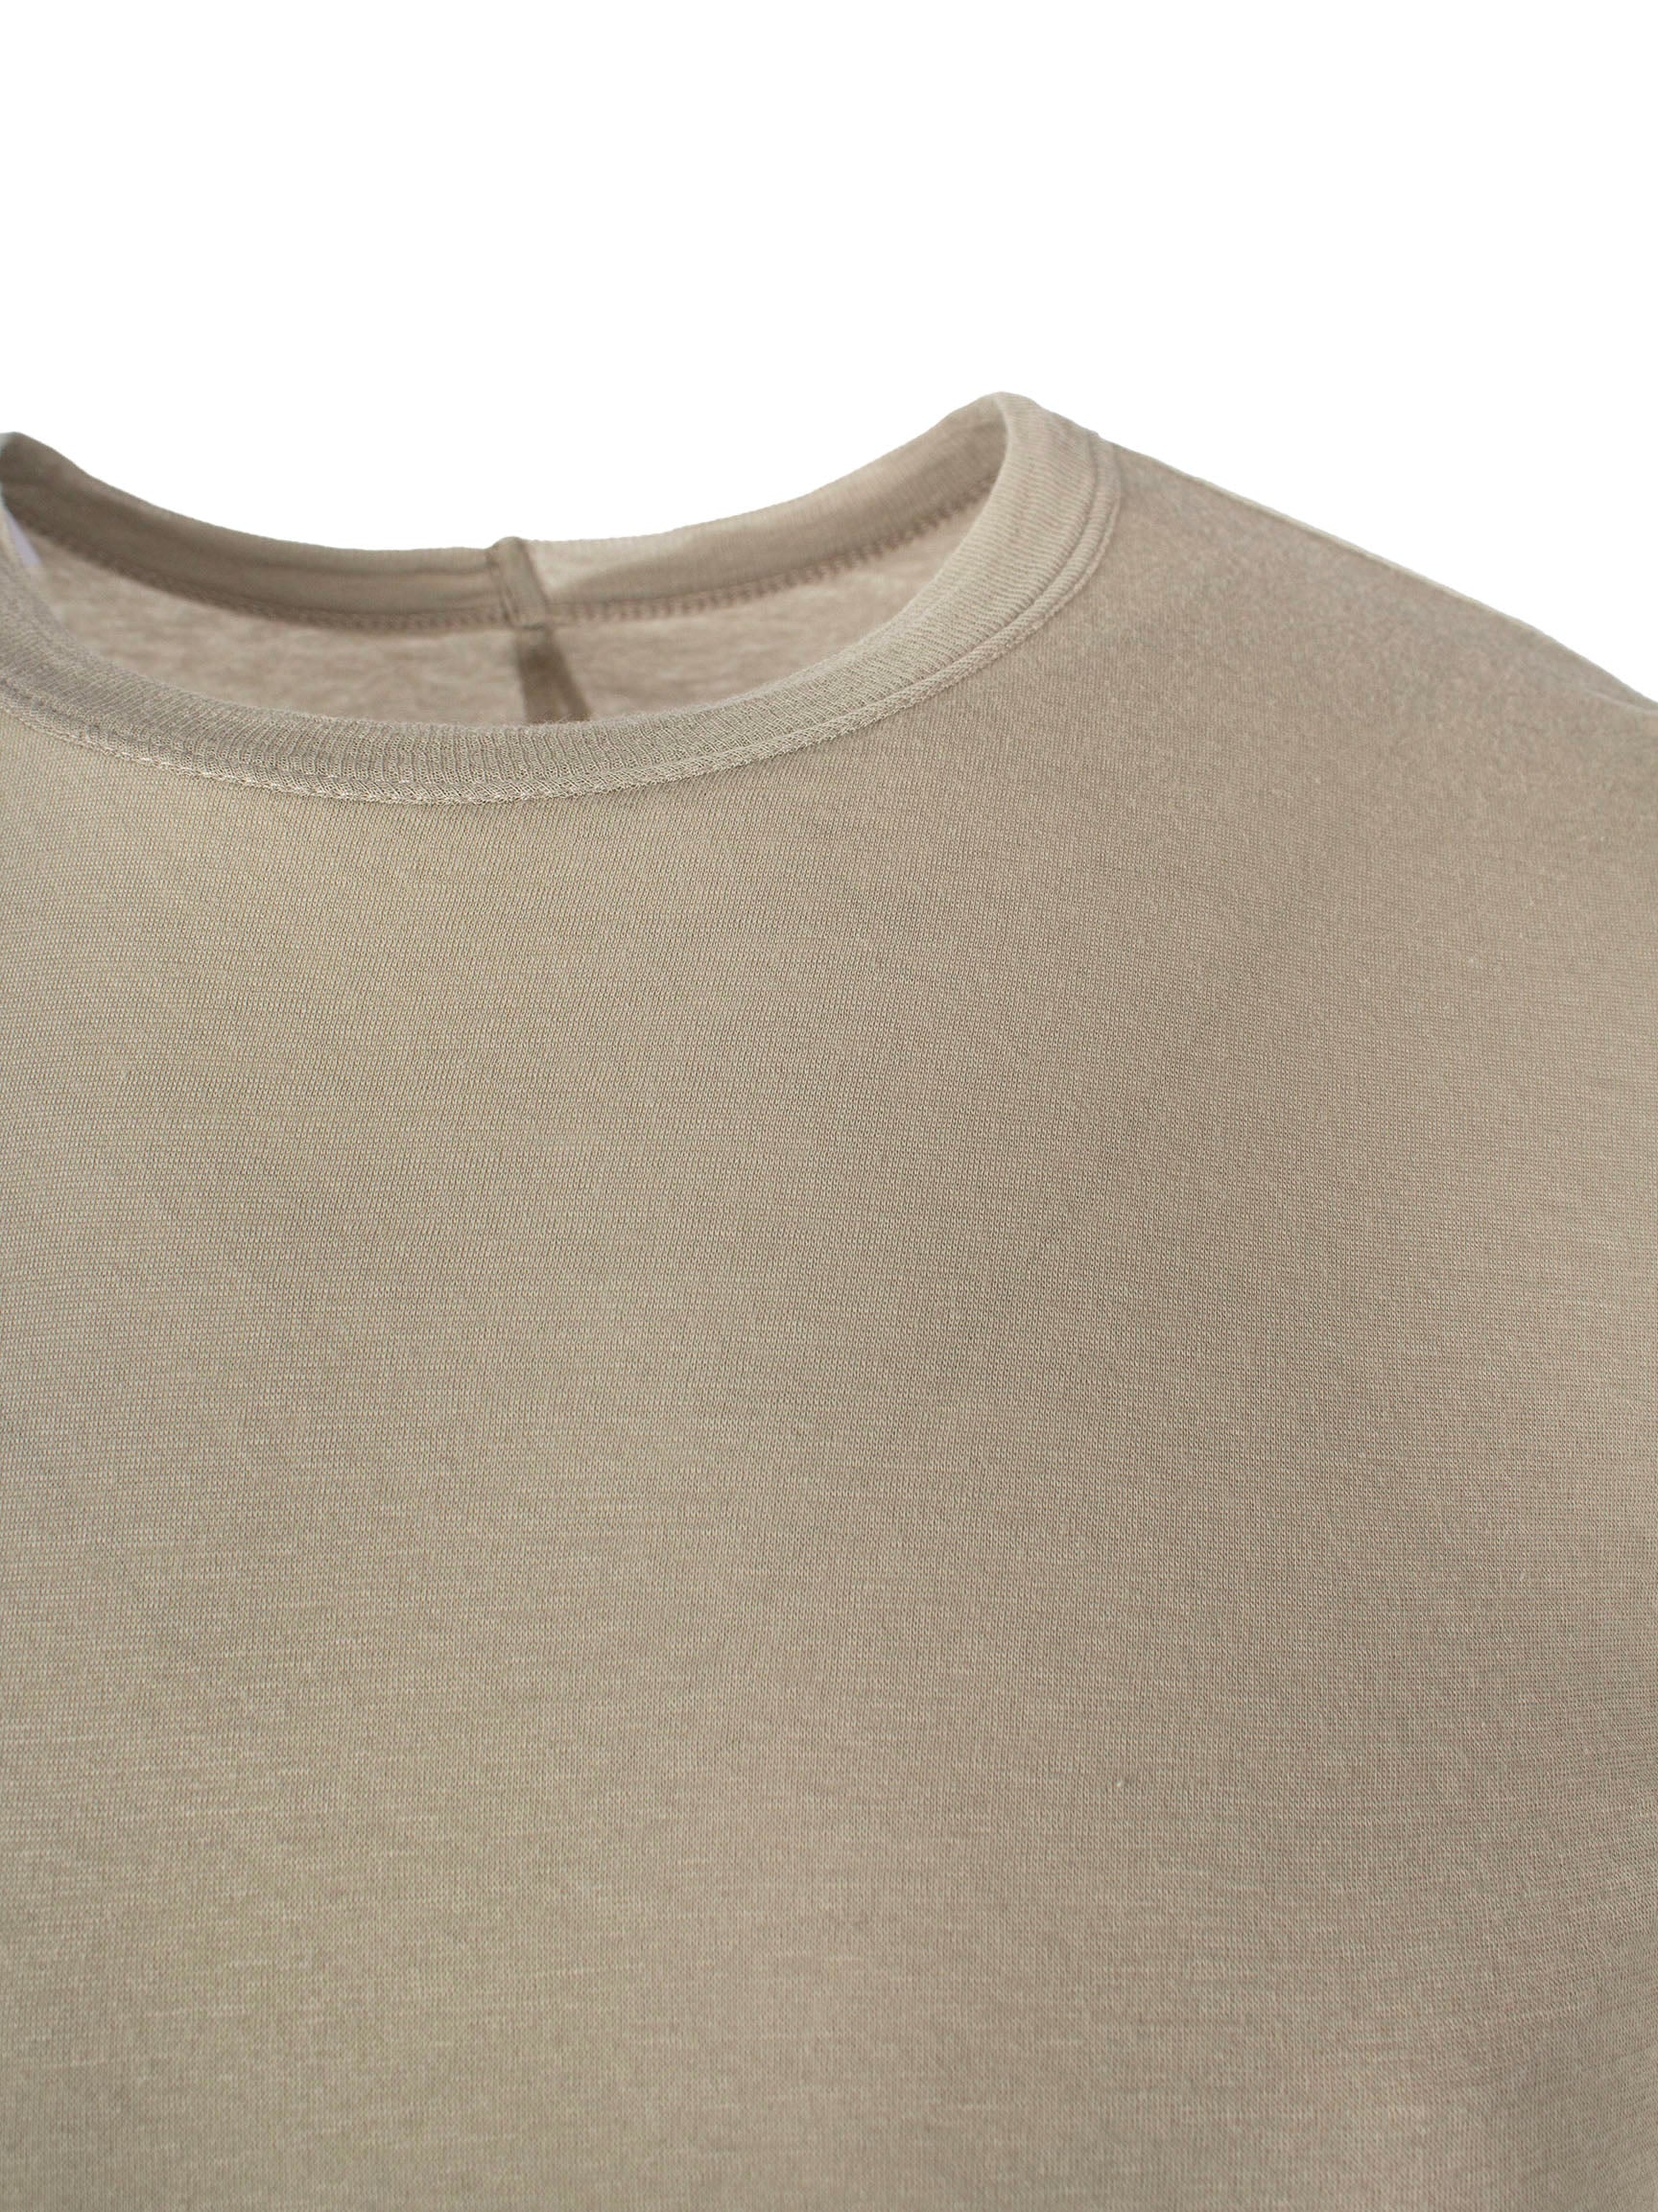 RICK OWENS CRINKLED COTTON T-SHIRT